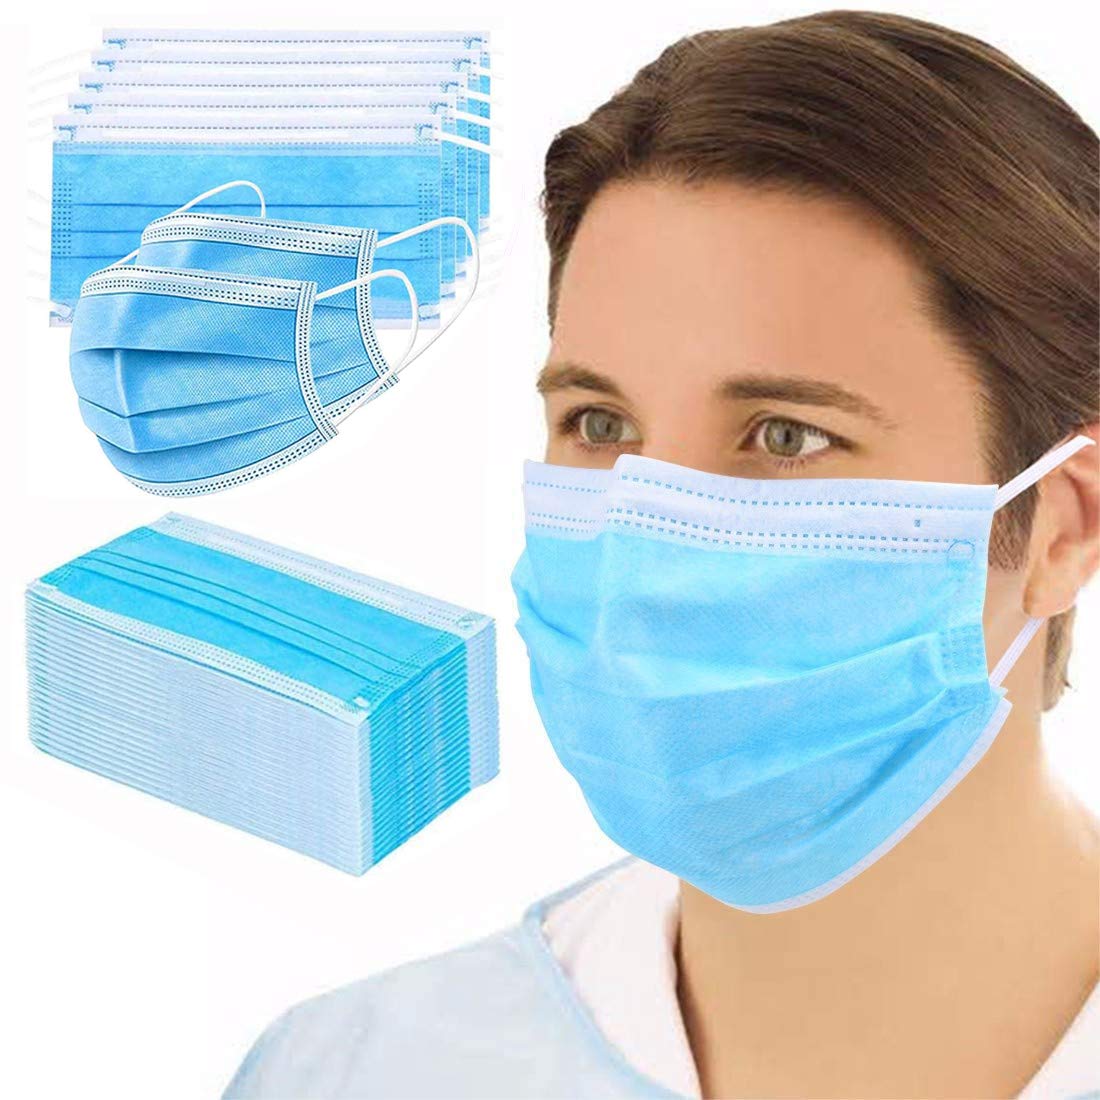 eEAR® DMask 3 layers Filtration Protective Disposable Face Mask, High Elastic Earbuds, Anti-Bacteria, Anti-Droplet, Anti-Pollen and Anti-Odor 50pcs Box